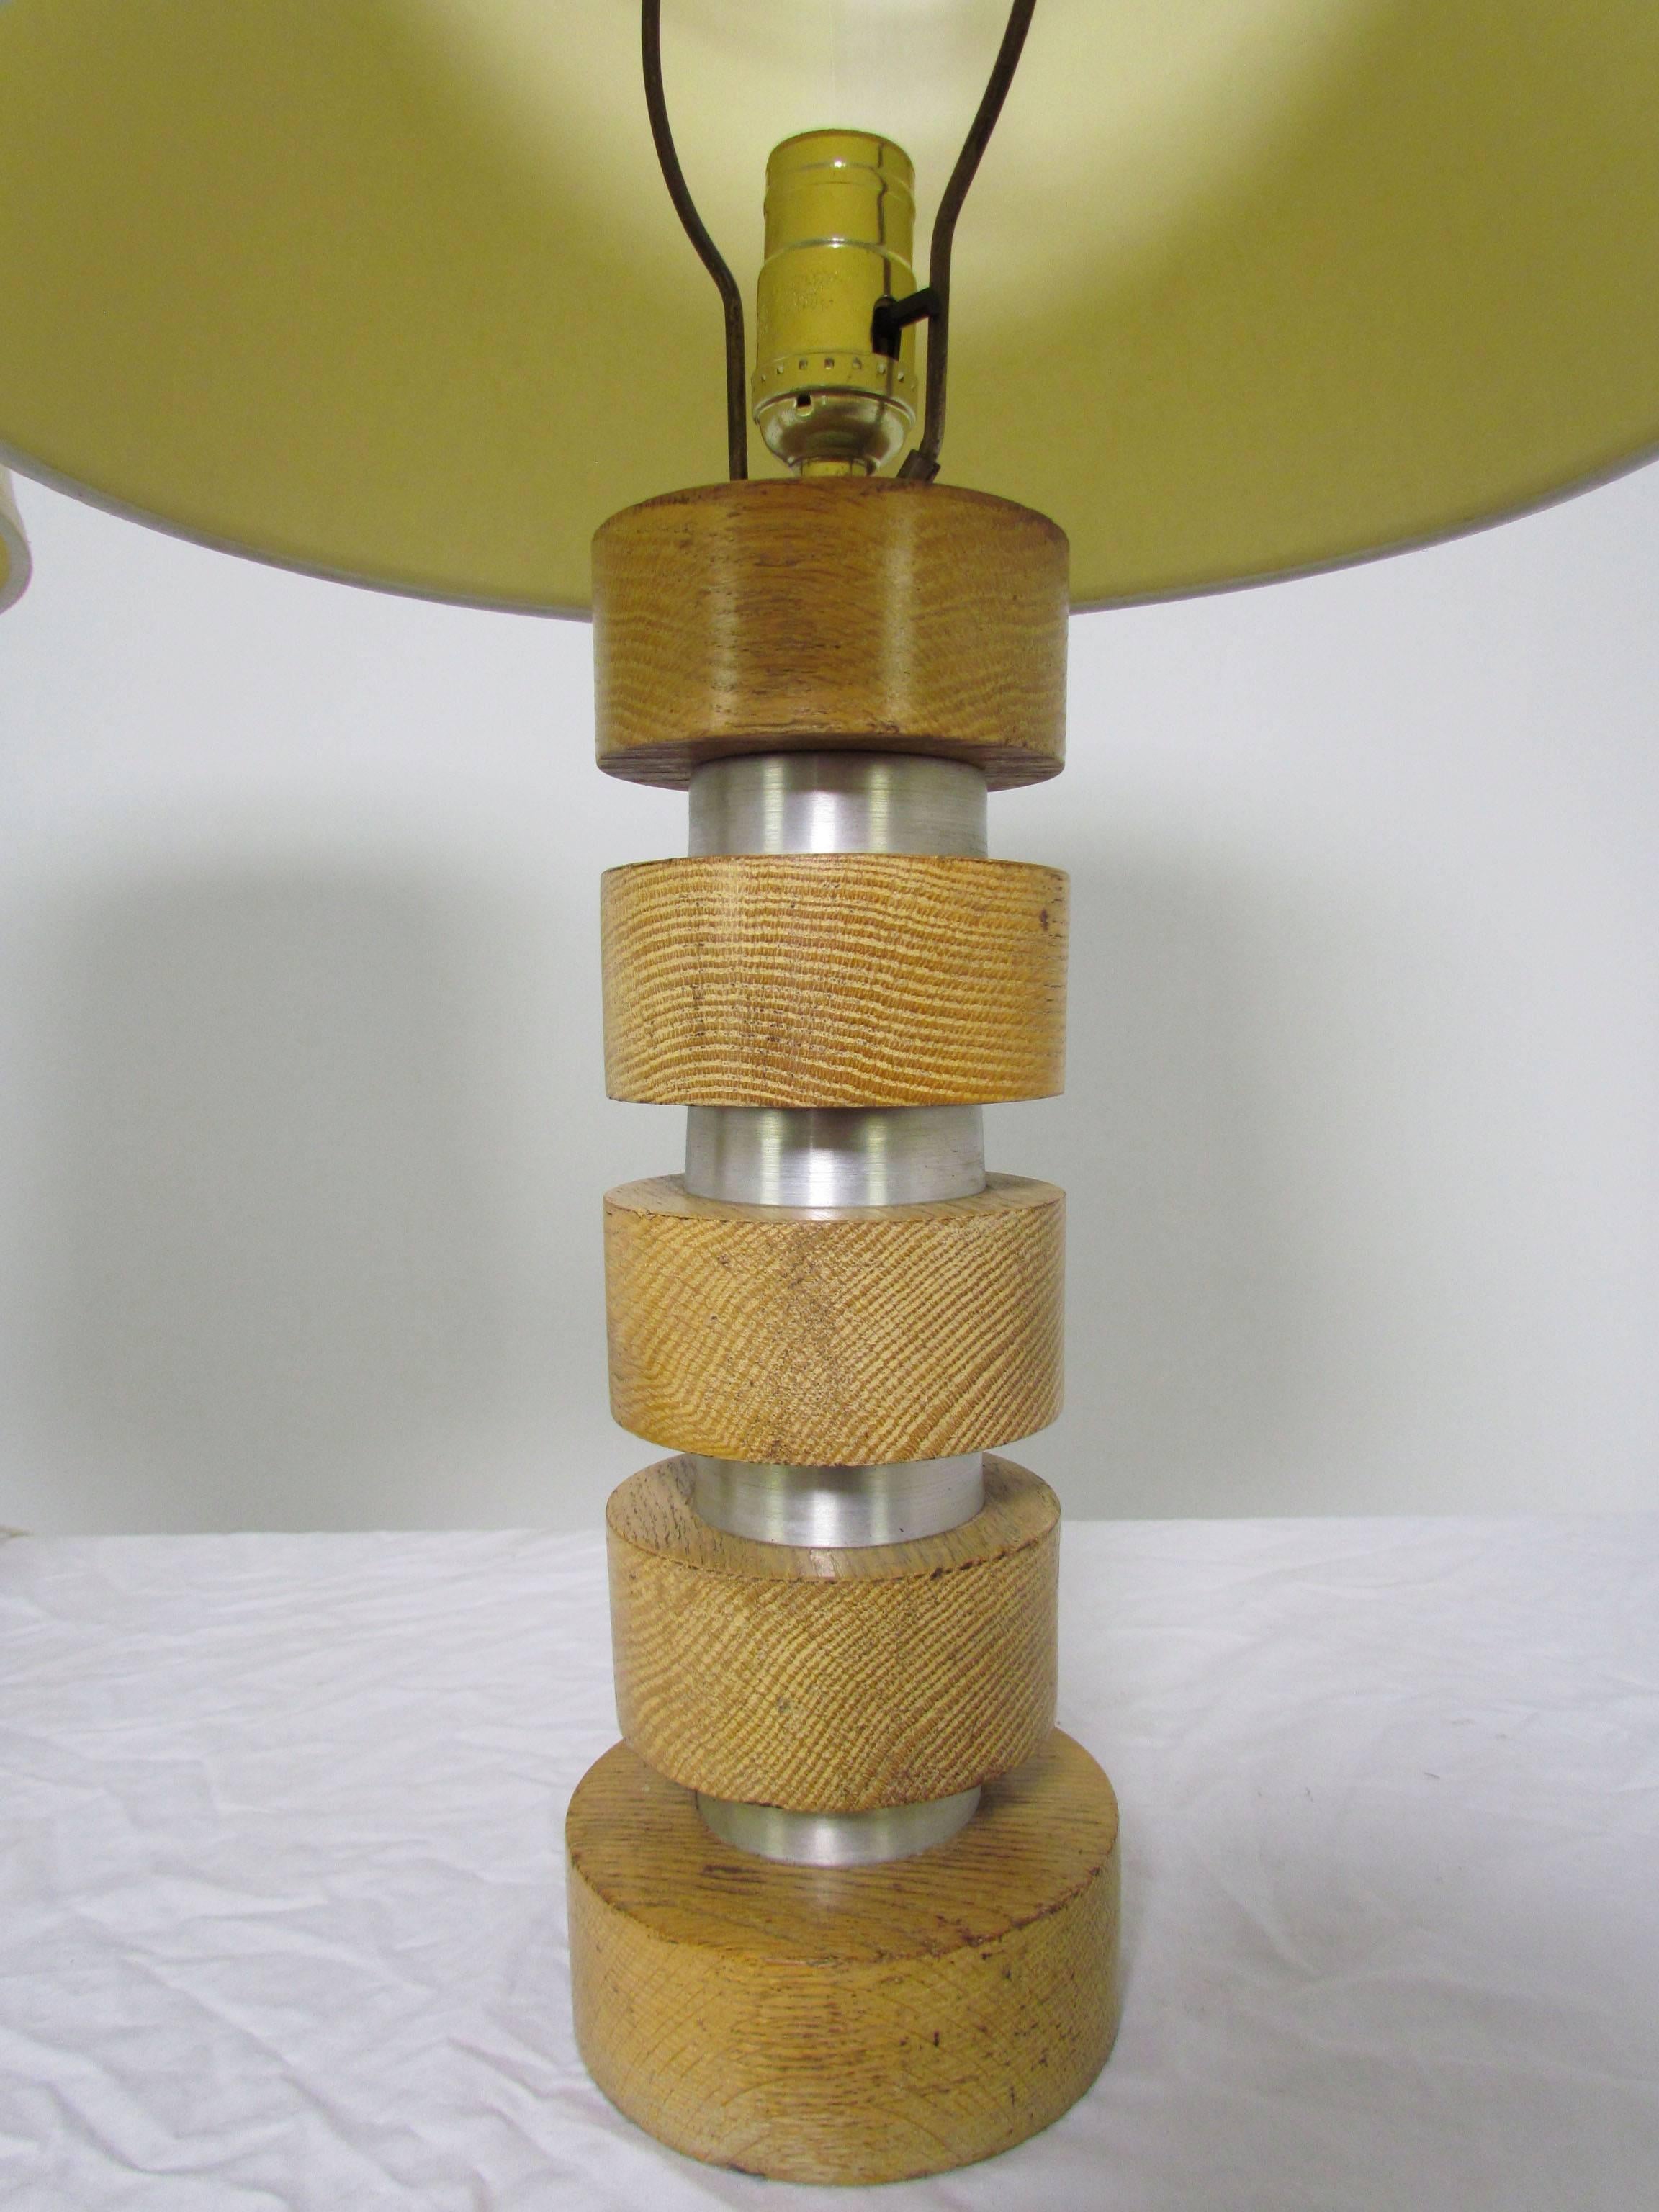 Pair of machine age table lamps in maple alternating with spun aluminum spacers by Russel Wright, circa 1950s. Shades are not included, shown for scale only.

Bases are 5